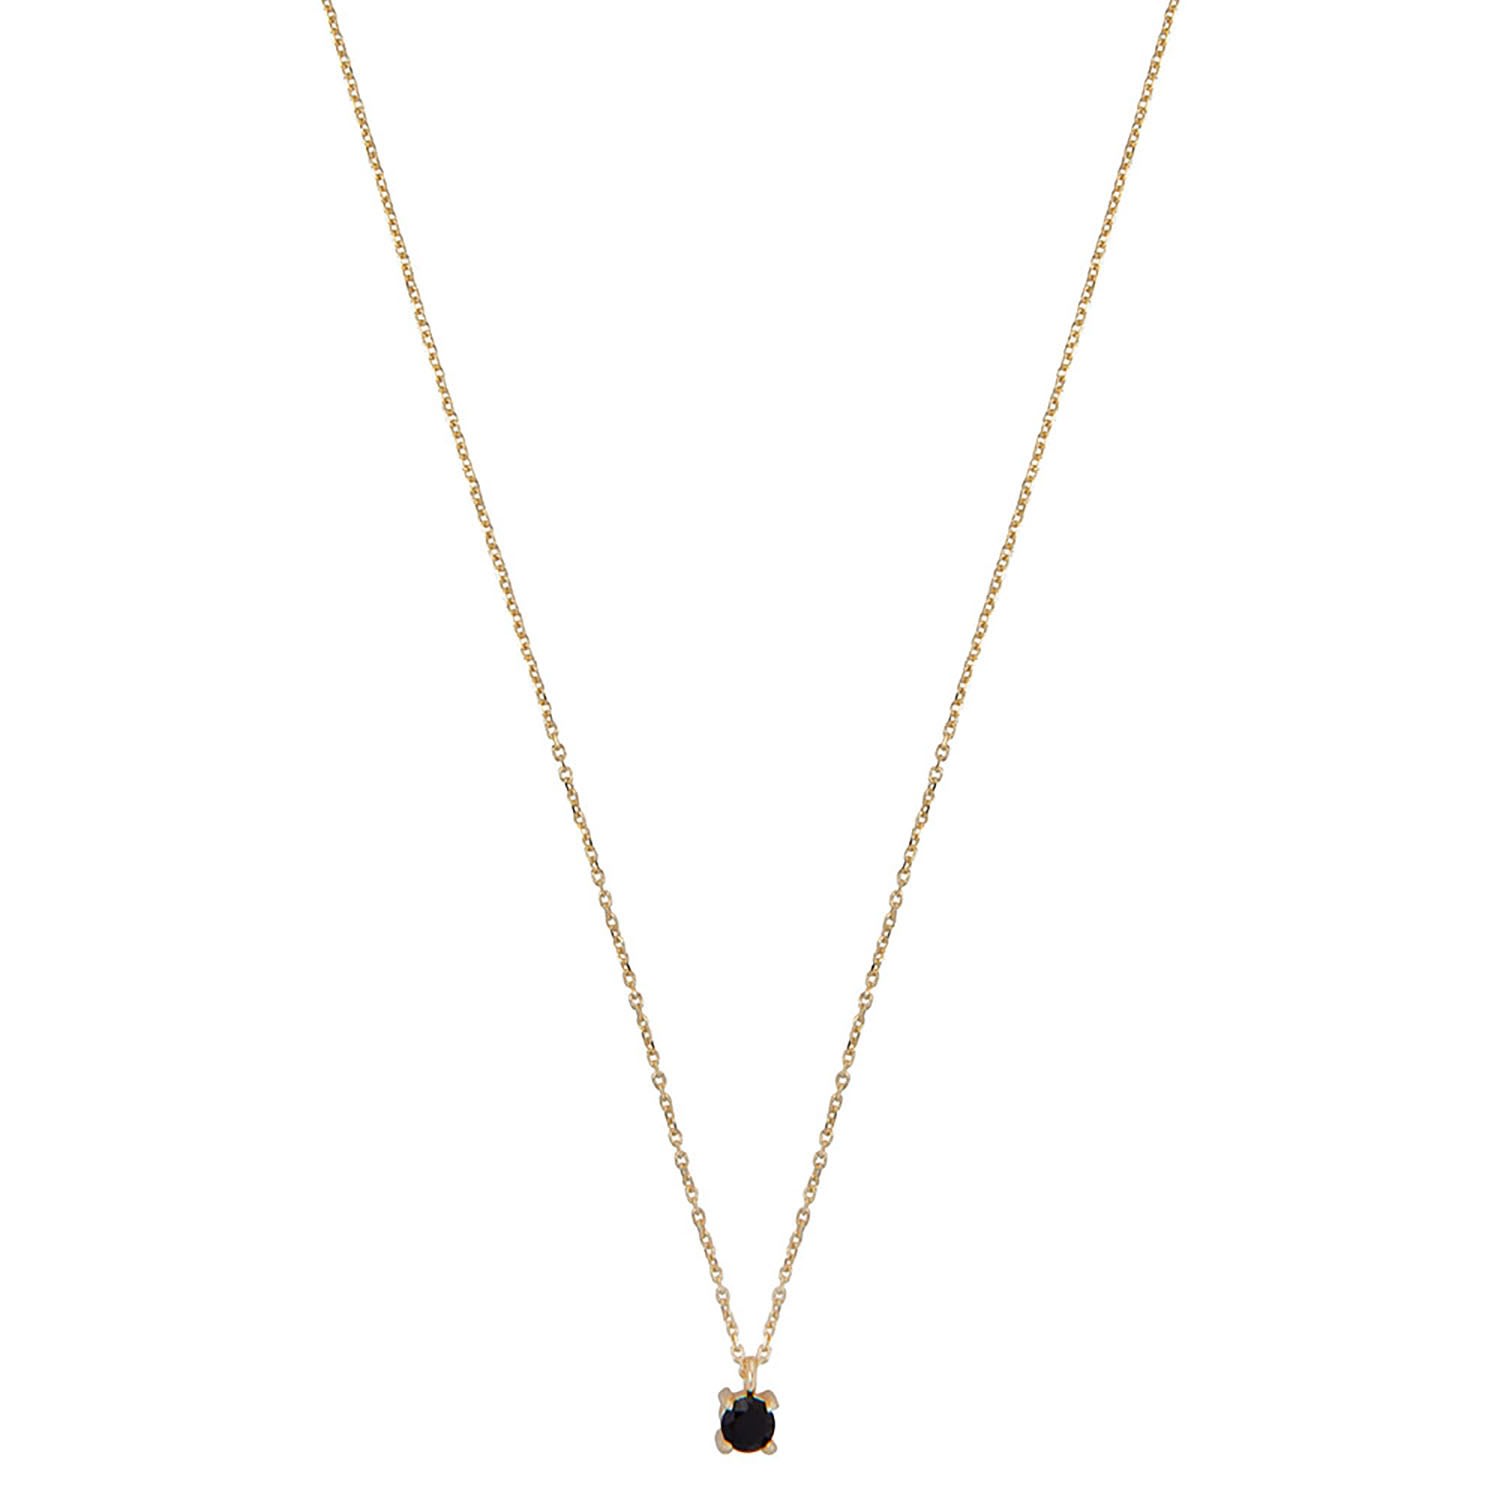 Ana Dyla Women's Irem Black Spinel Necklace In Gold